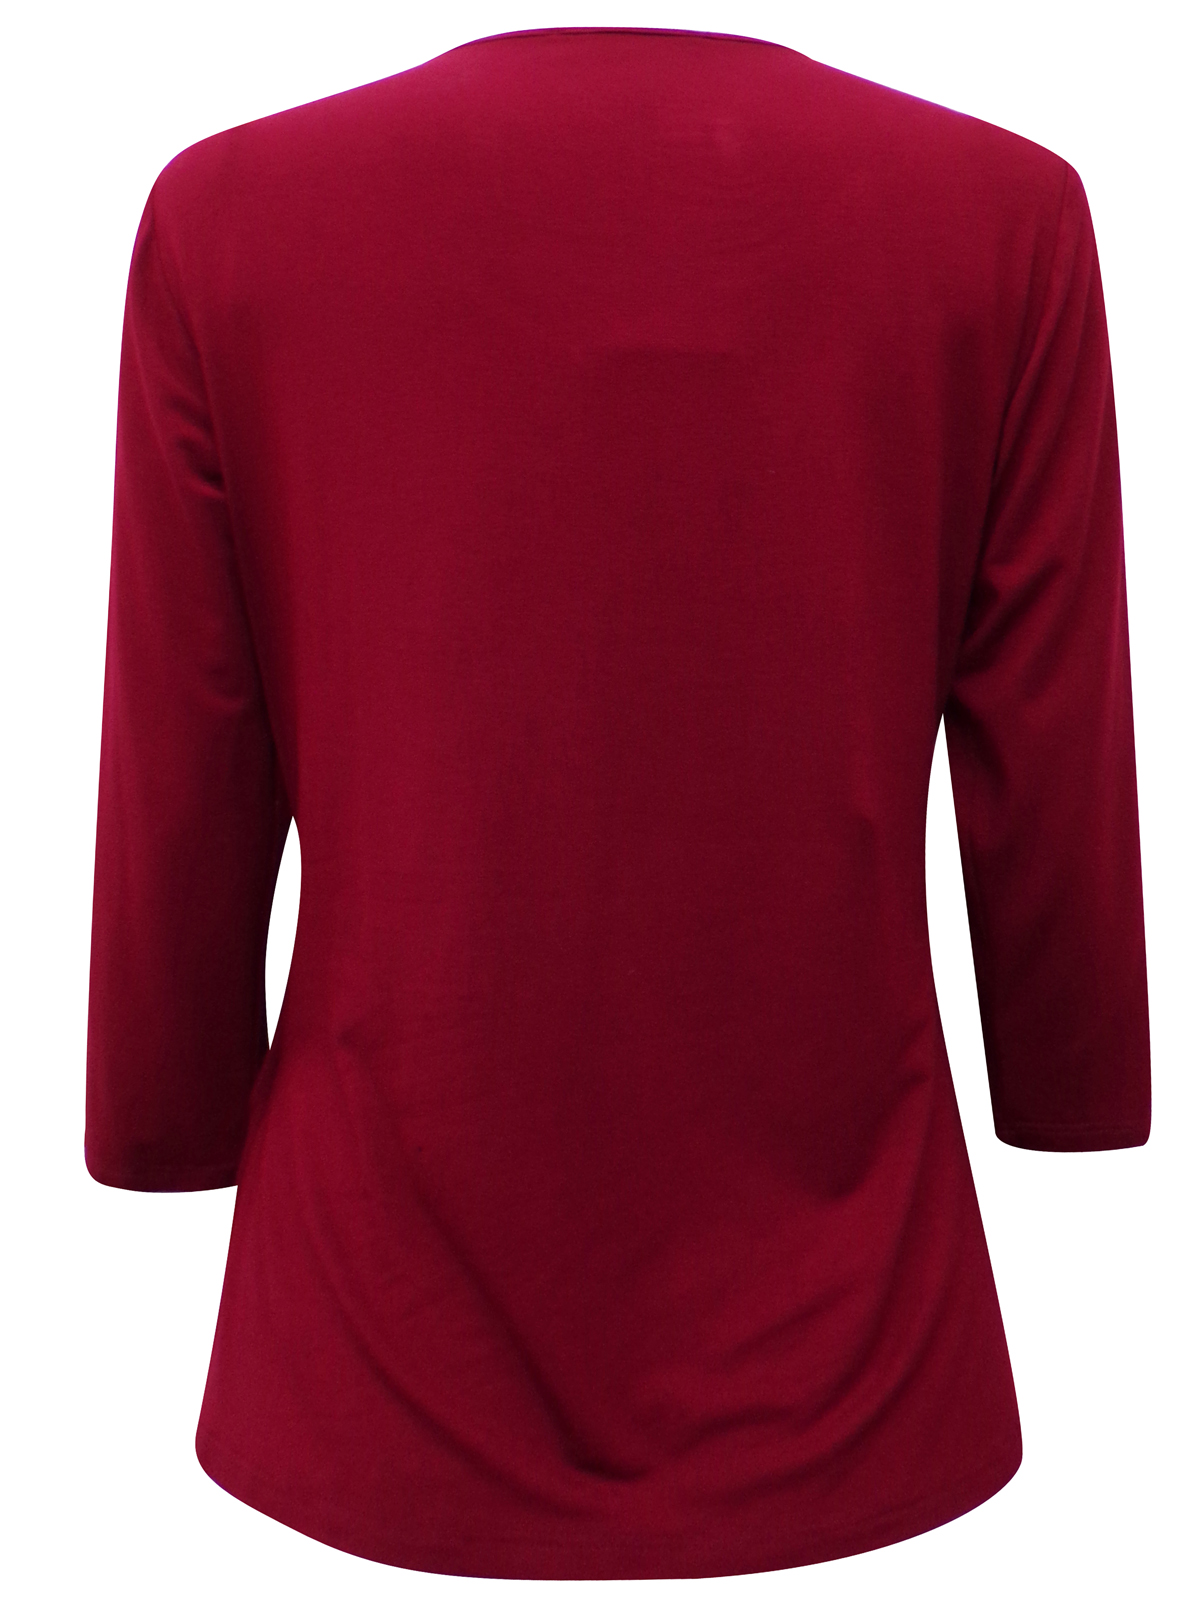 First Avenue BURGUNDY Twist V-Neck 3/4 Sleeve Jersey Top - Size 12 to 20